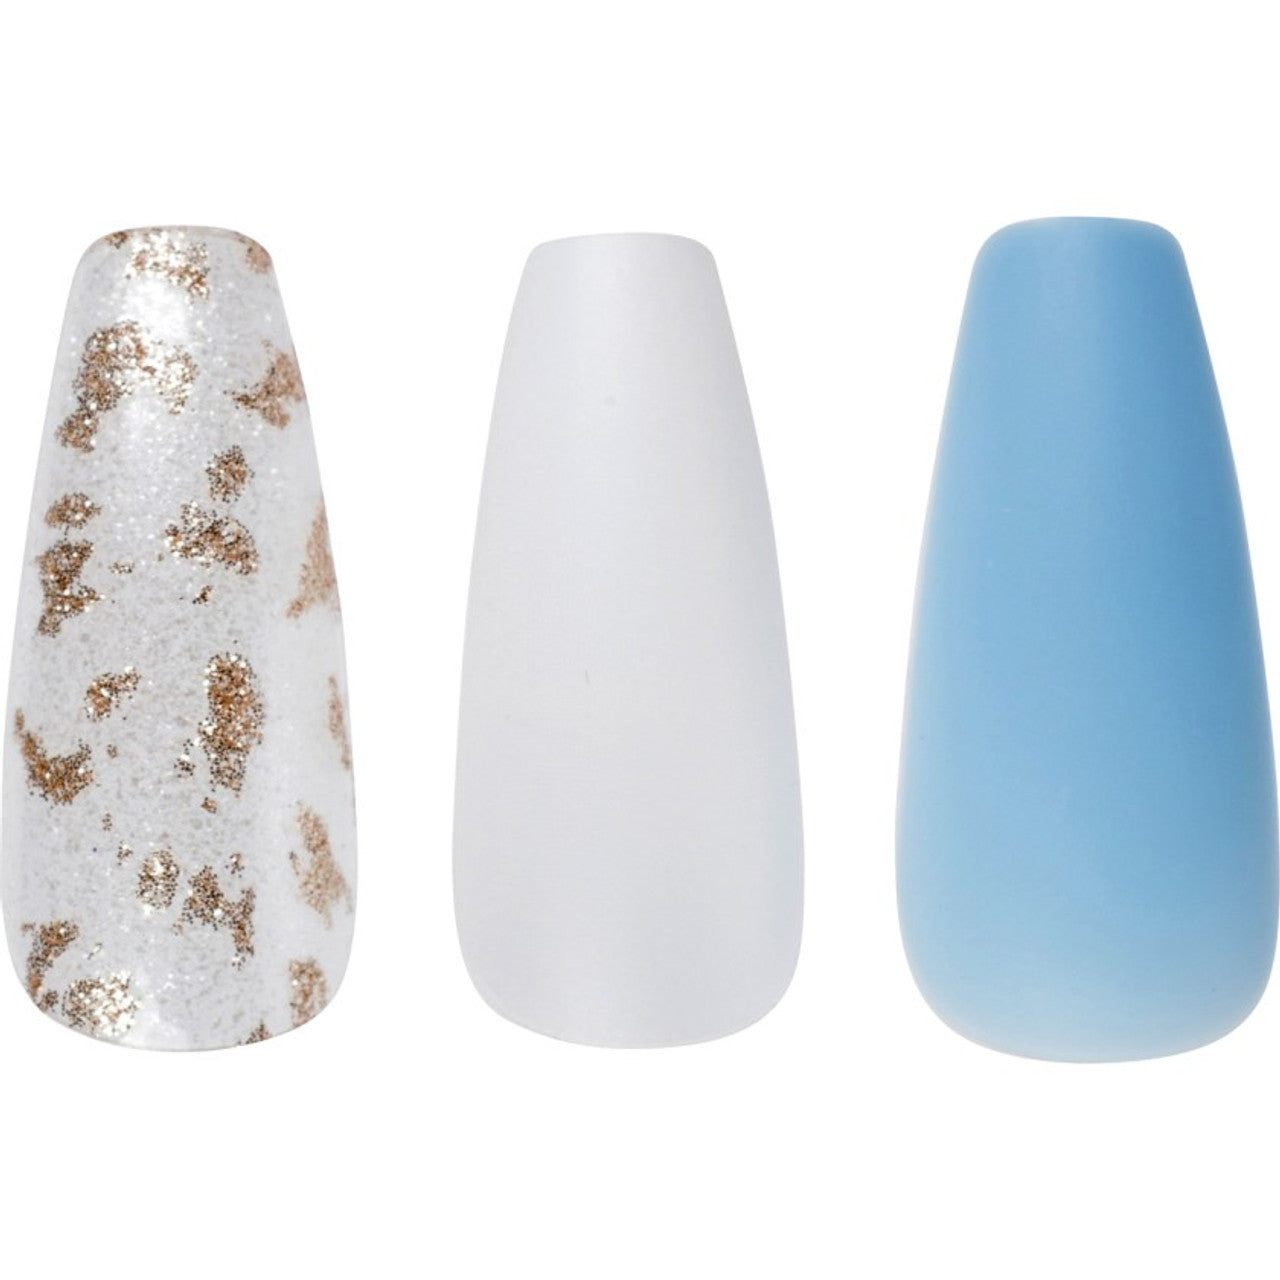 Cala - Glam Couture Coffin Baby Blue Press On Nails